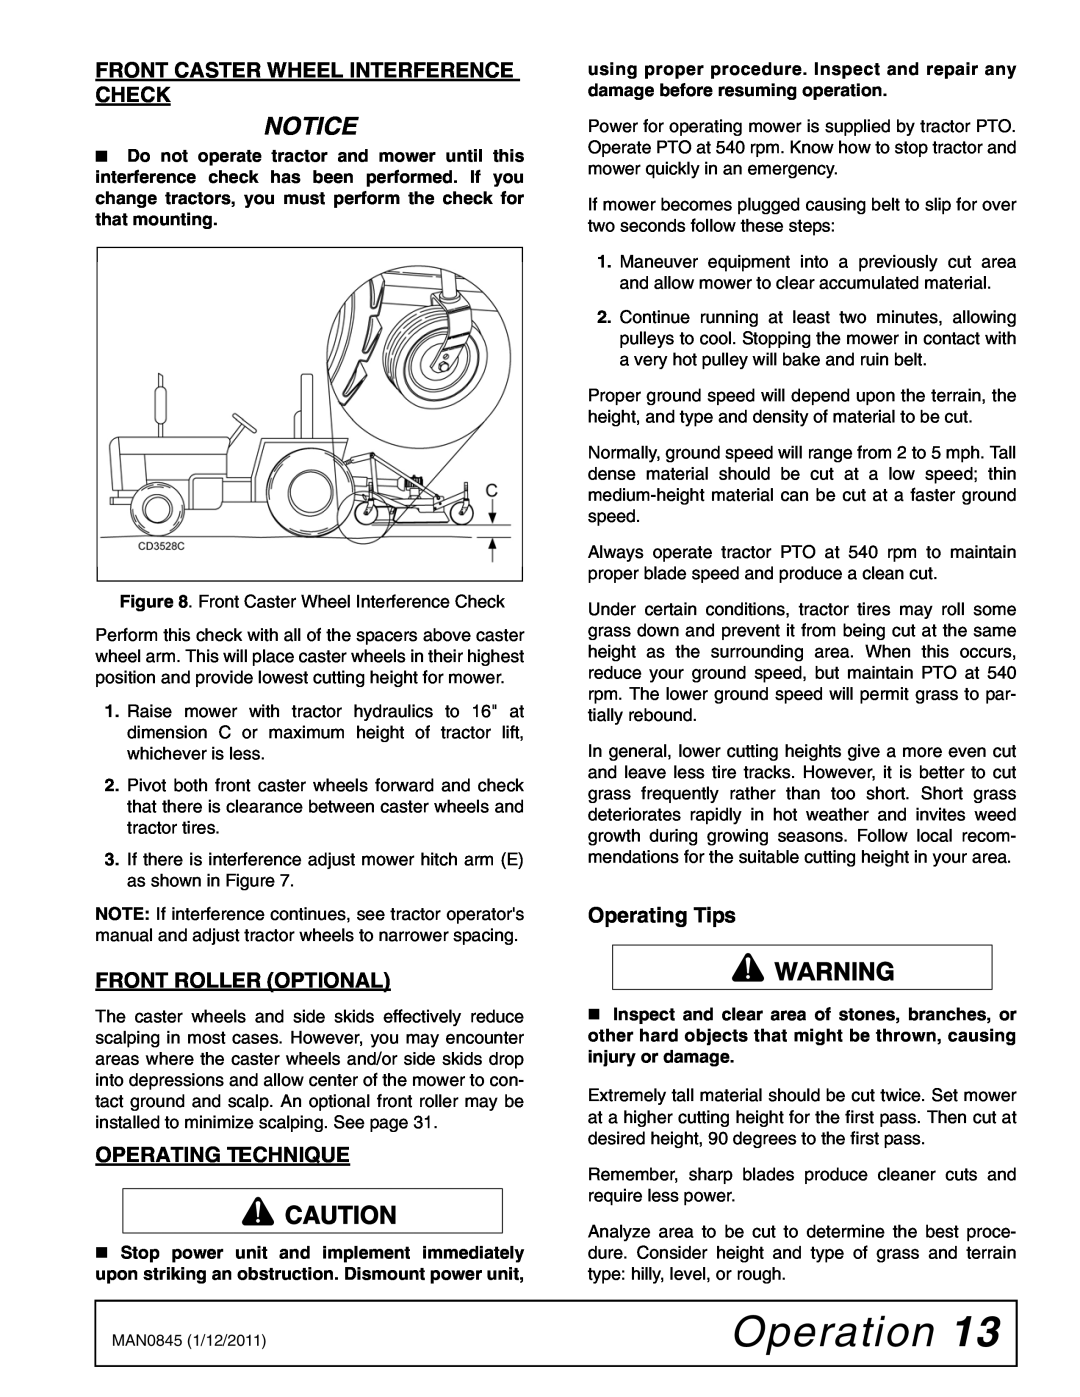 Woods Equipment RD990X Front Caster Wheel Interference Check, Front Roller Optional, Operating Technique, Operating Tips 